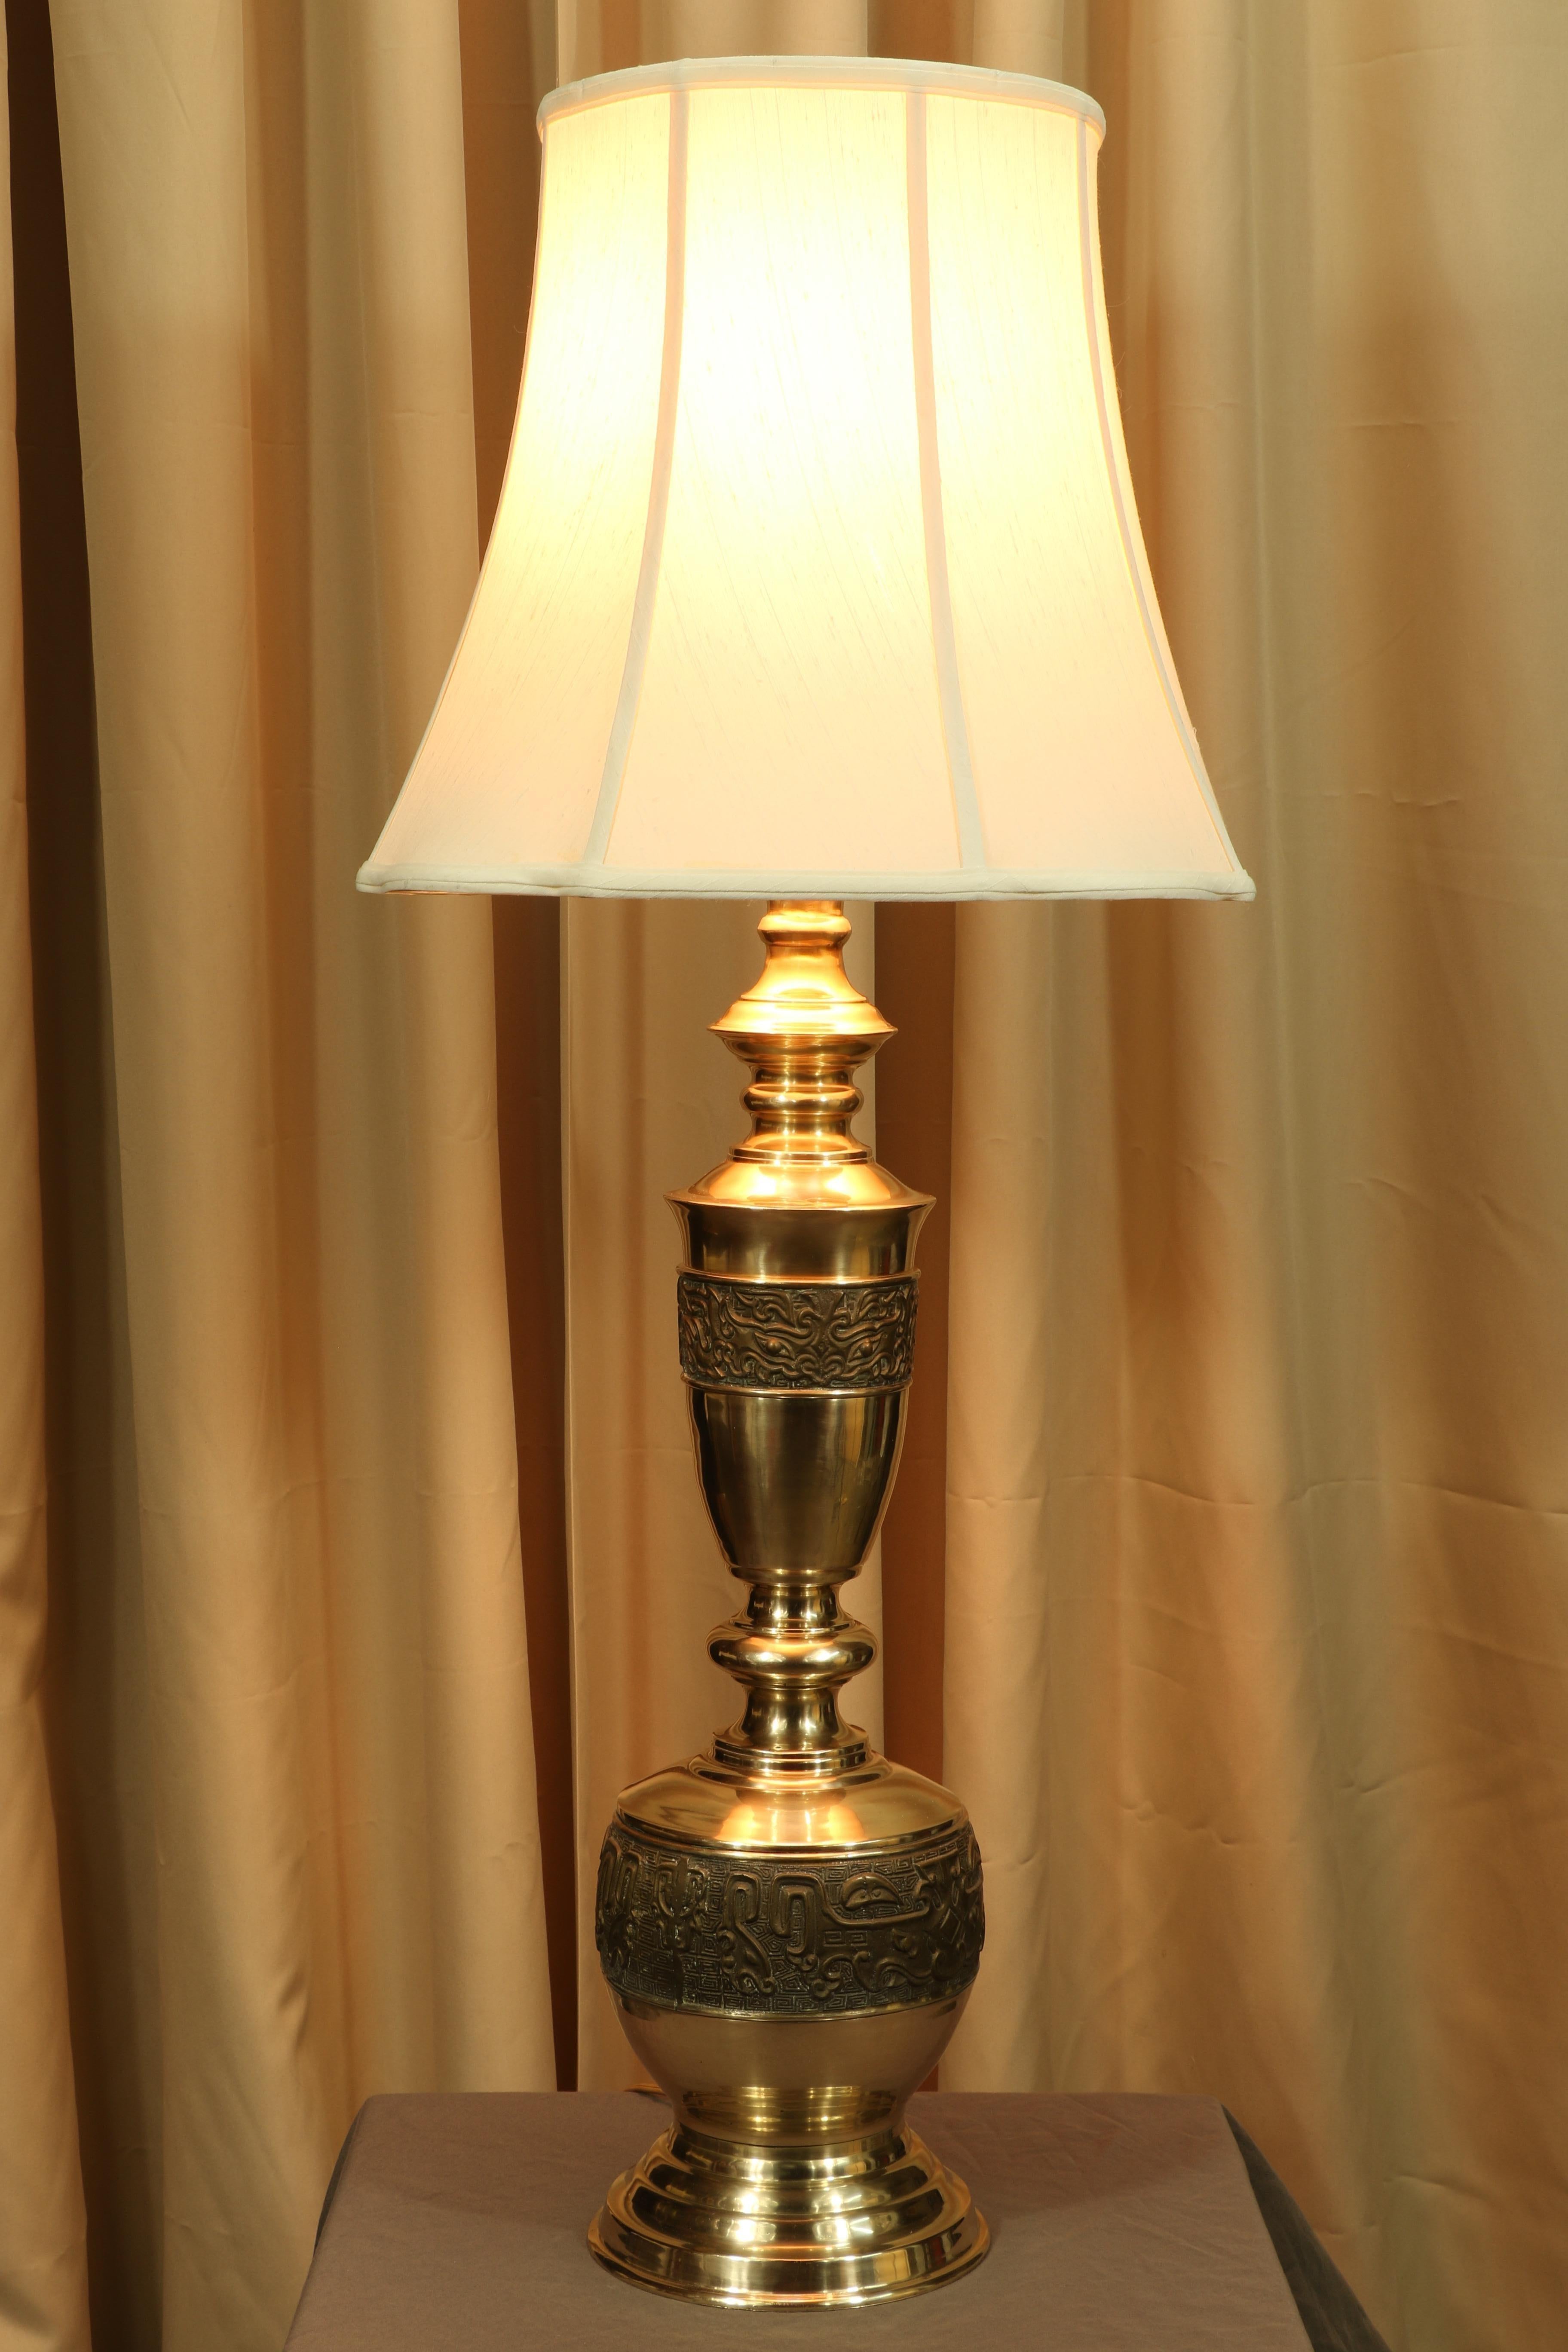 The beautiful brass patina makes this James Mont mid-century lamp a standout. If a lamp can be exciting, this is it. It is encircled with etching and Asian motif symbols around the outside. It is a beautiful example of Mont's Hollywood Regency style